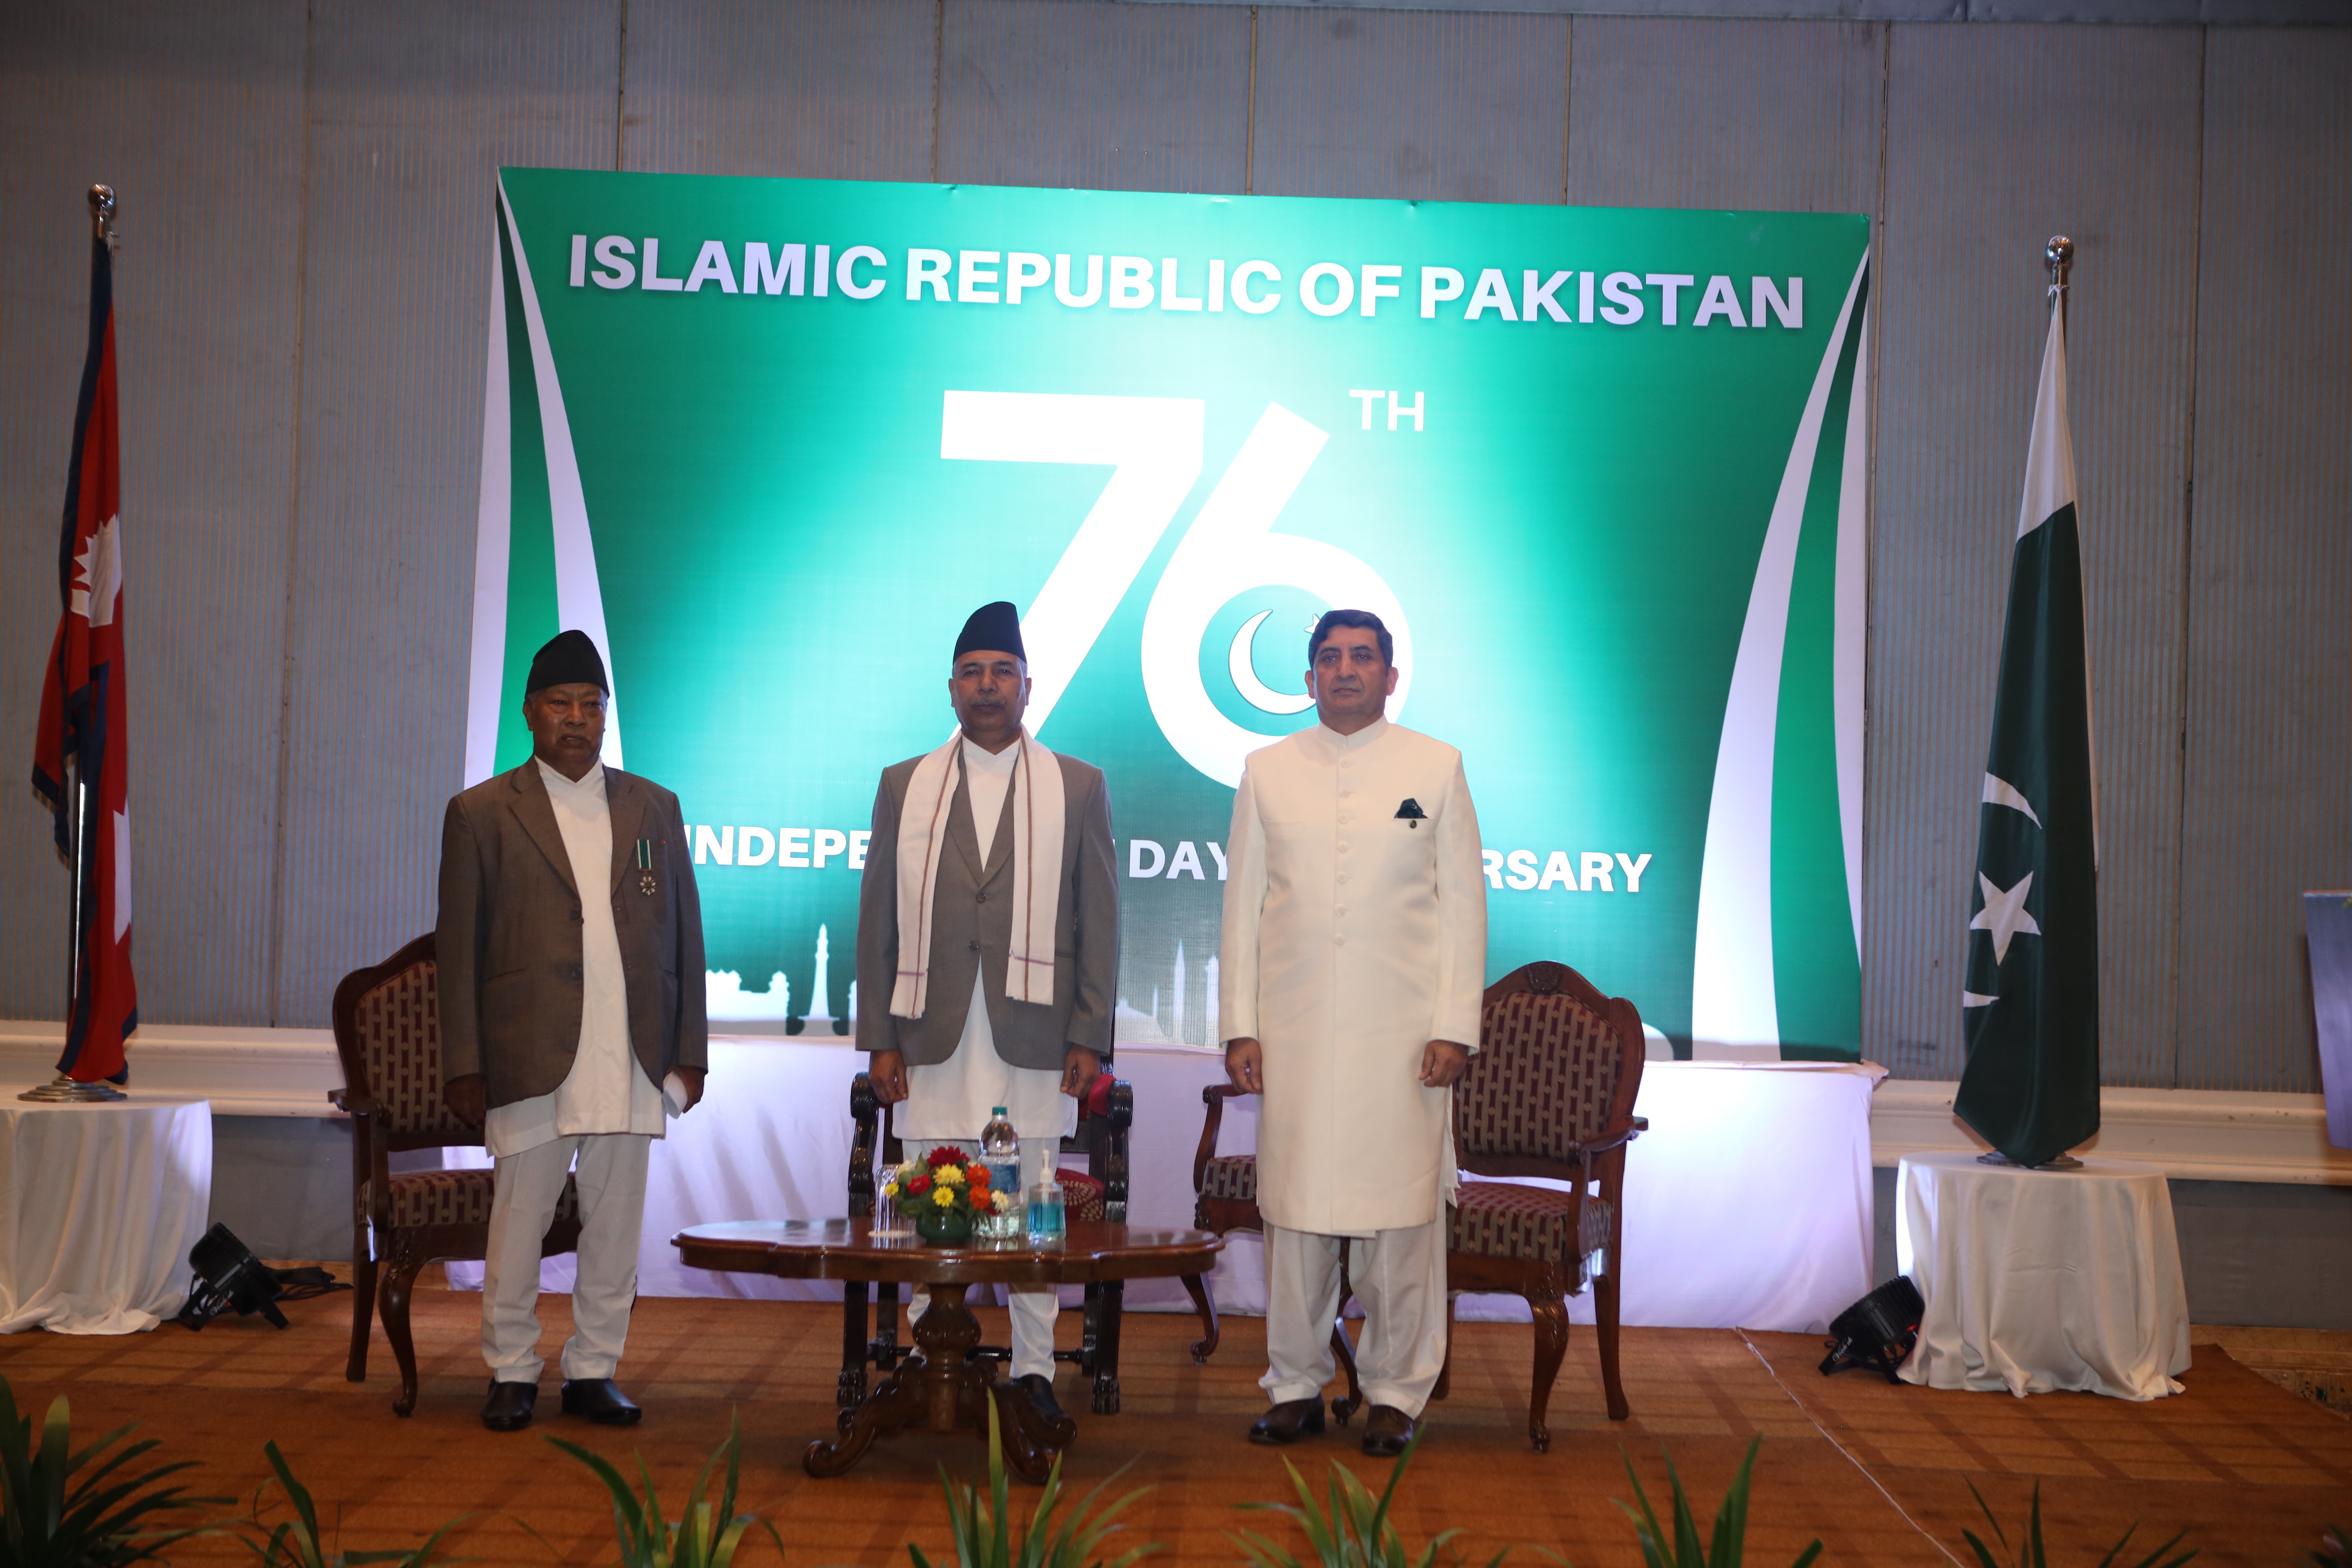 Pak embassy hosts a reception to celebrate 76th Independence Day of Pakistan